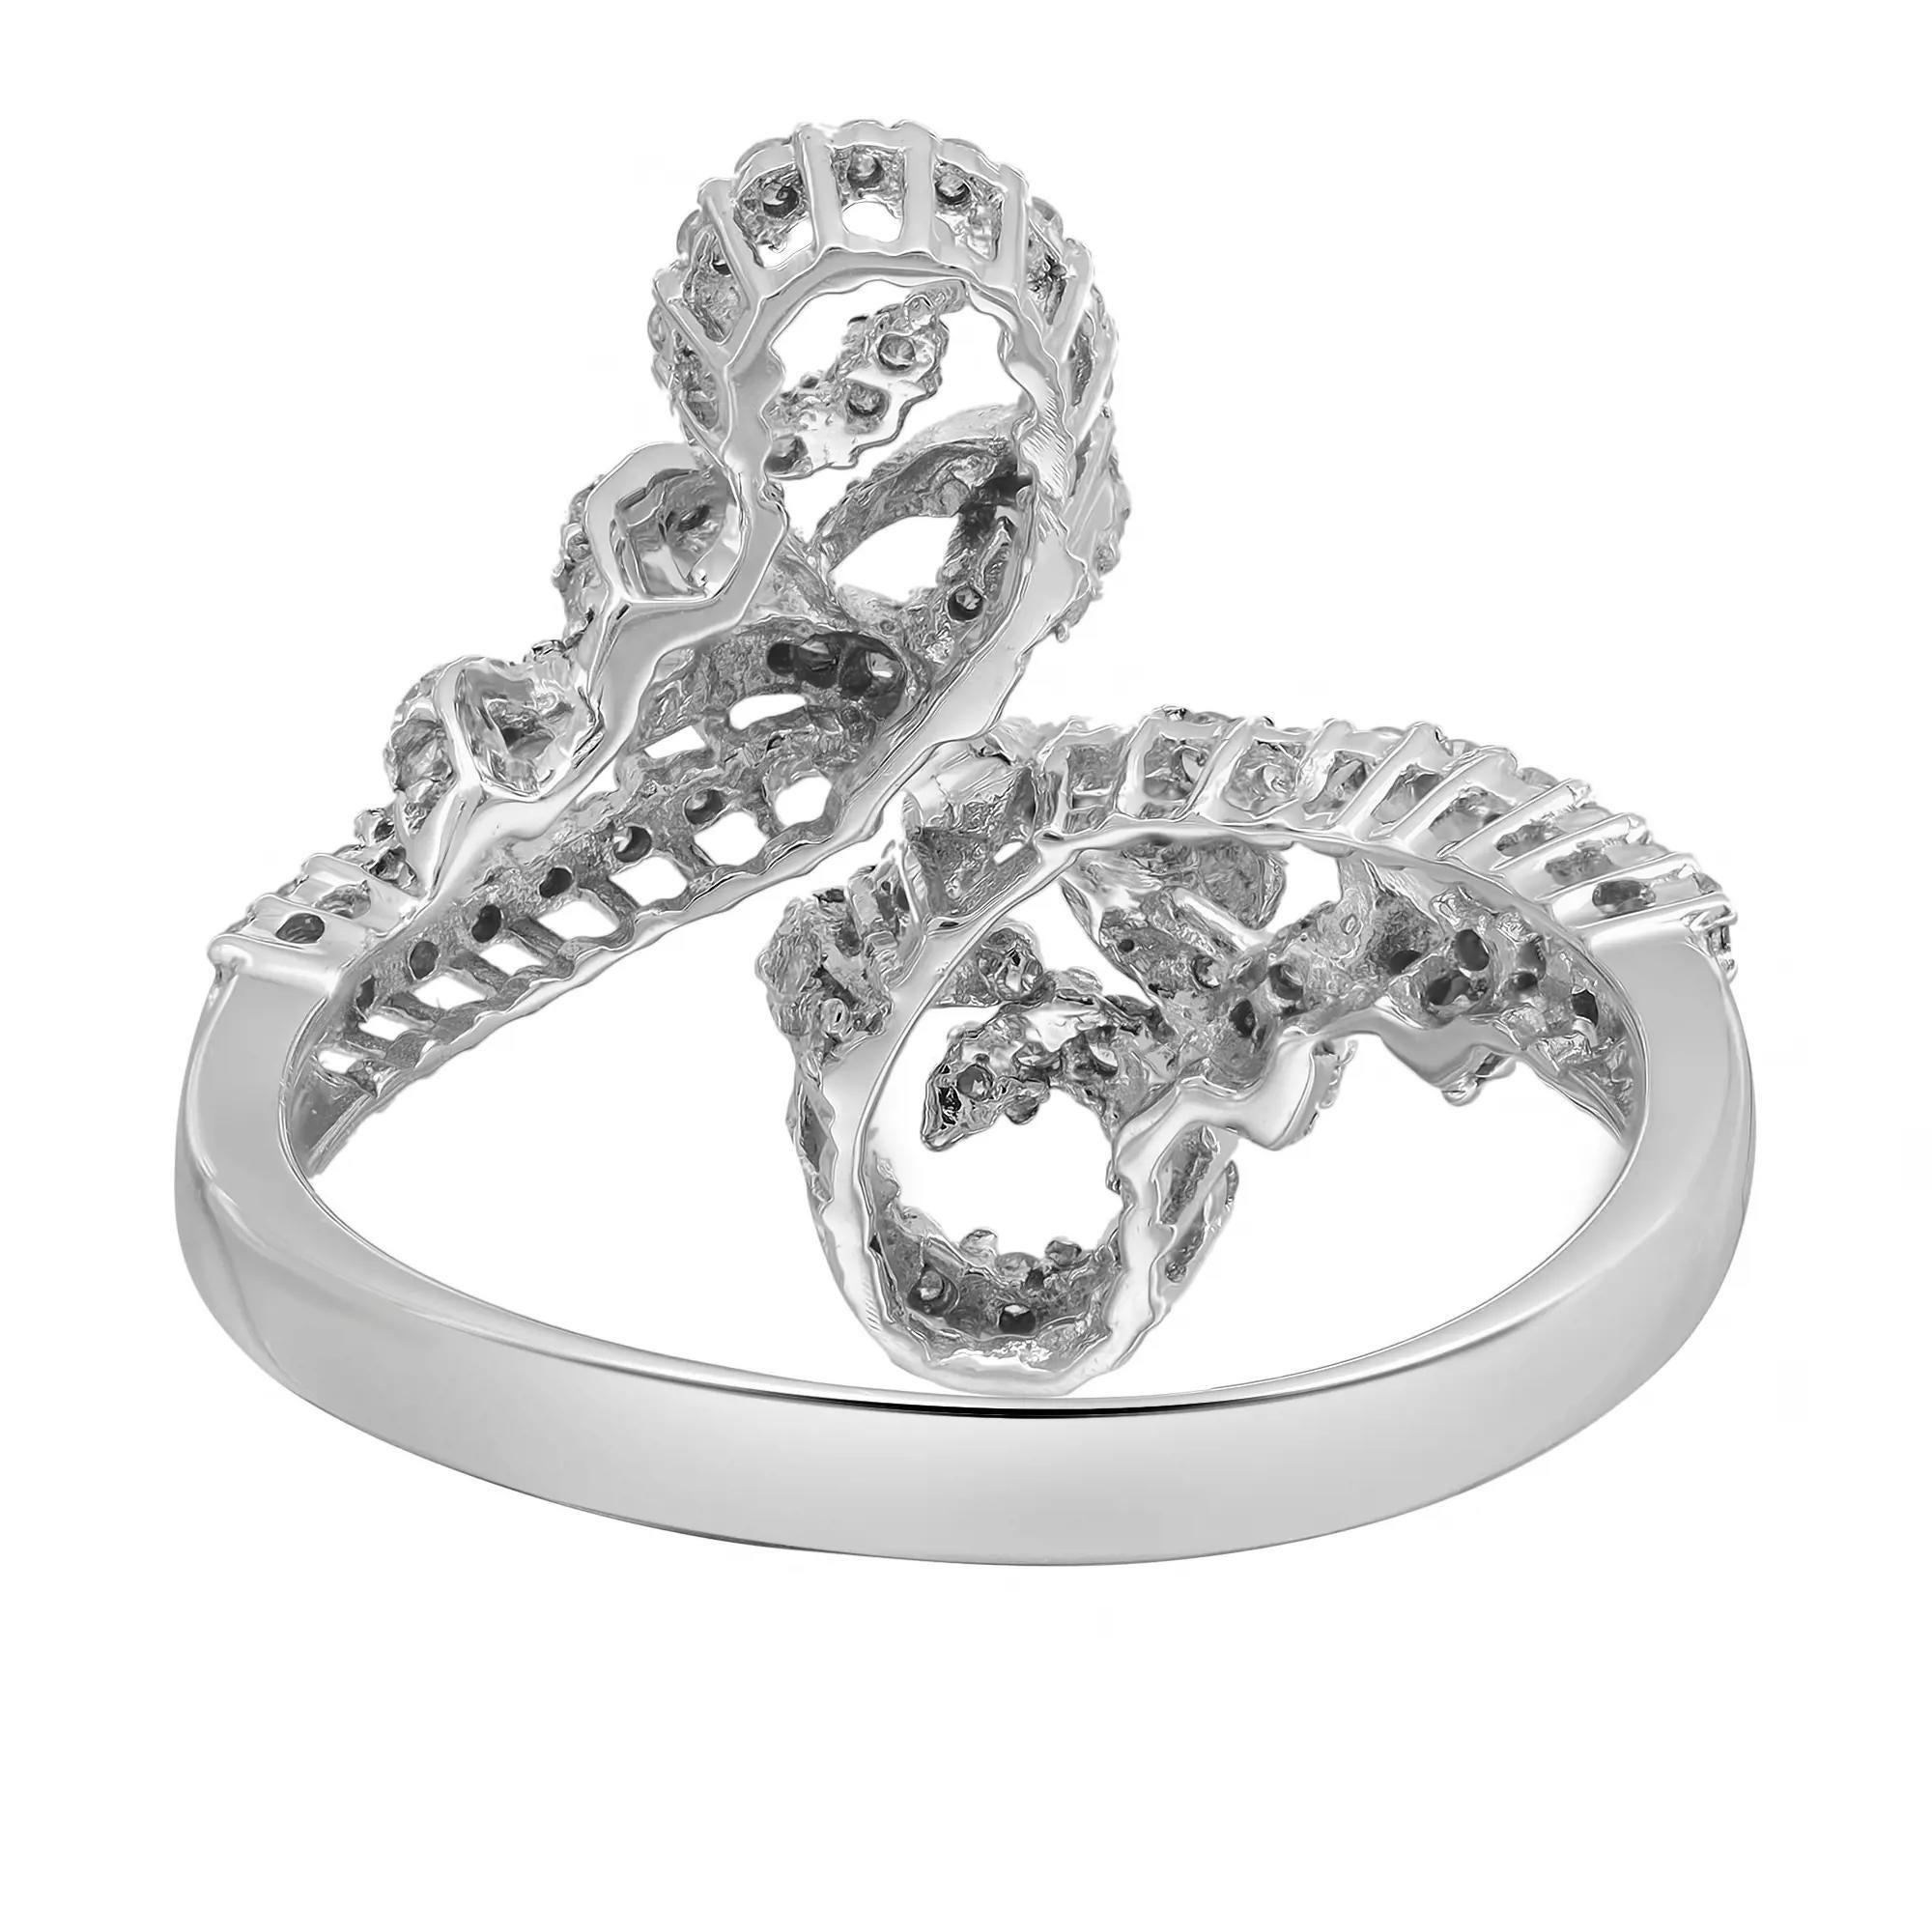 Modern 0.62cttw Round Cut Diamond Ladies Cocktail Ring 14k White Gold For Sale